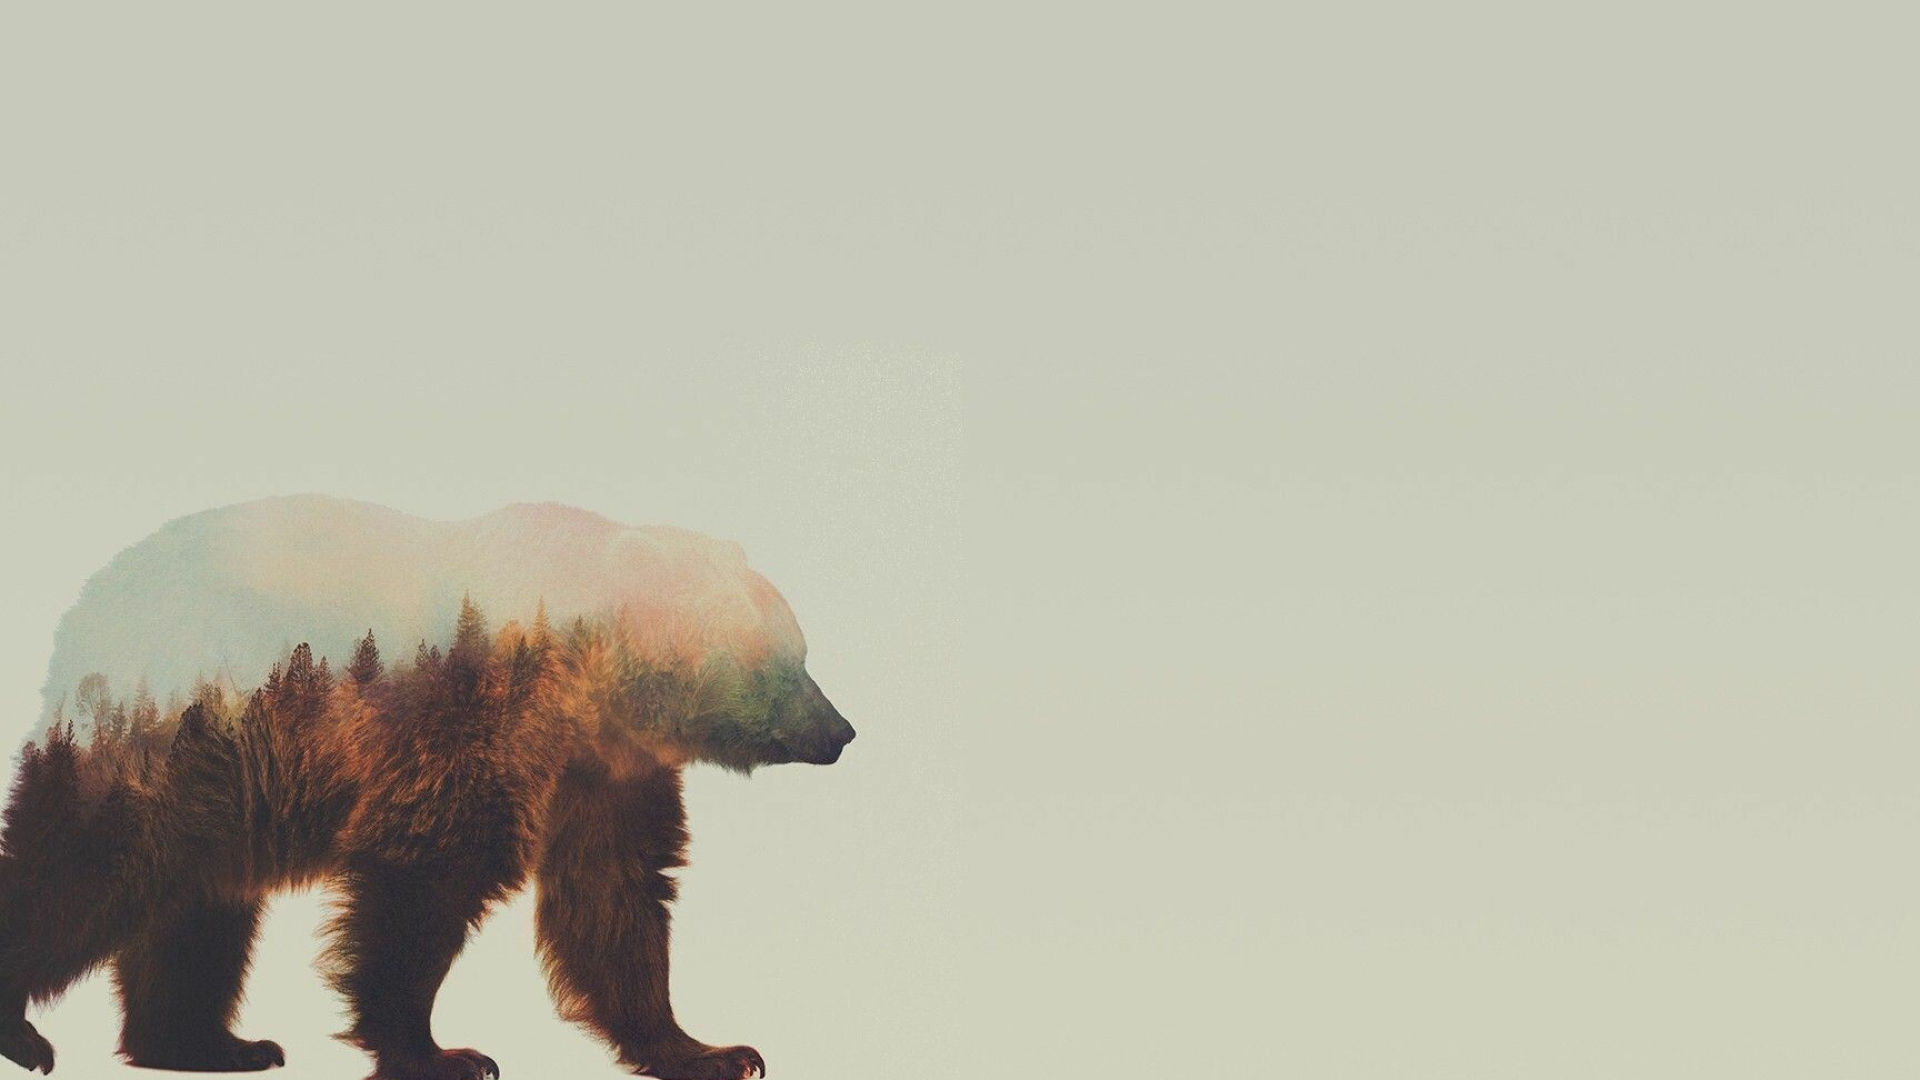 Bear: A large, stocky animal with thick, fluffy fur. 1920x1080 Full HD Wallpaper.